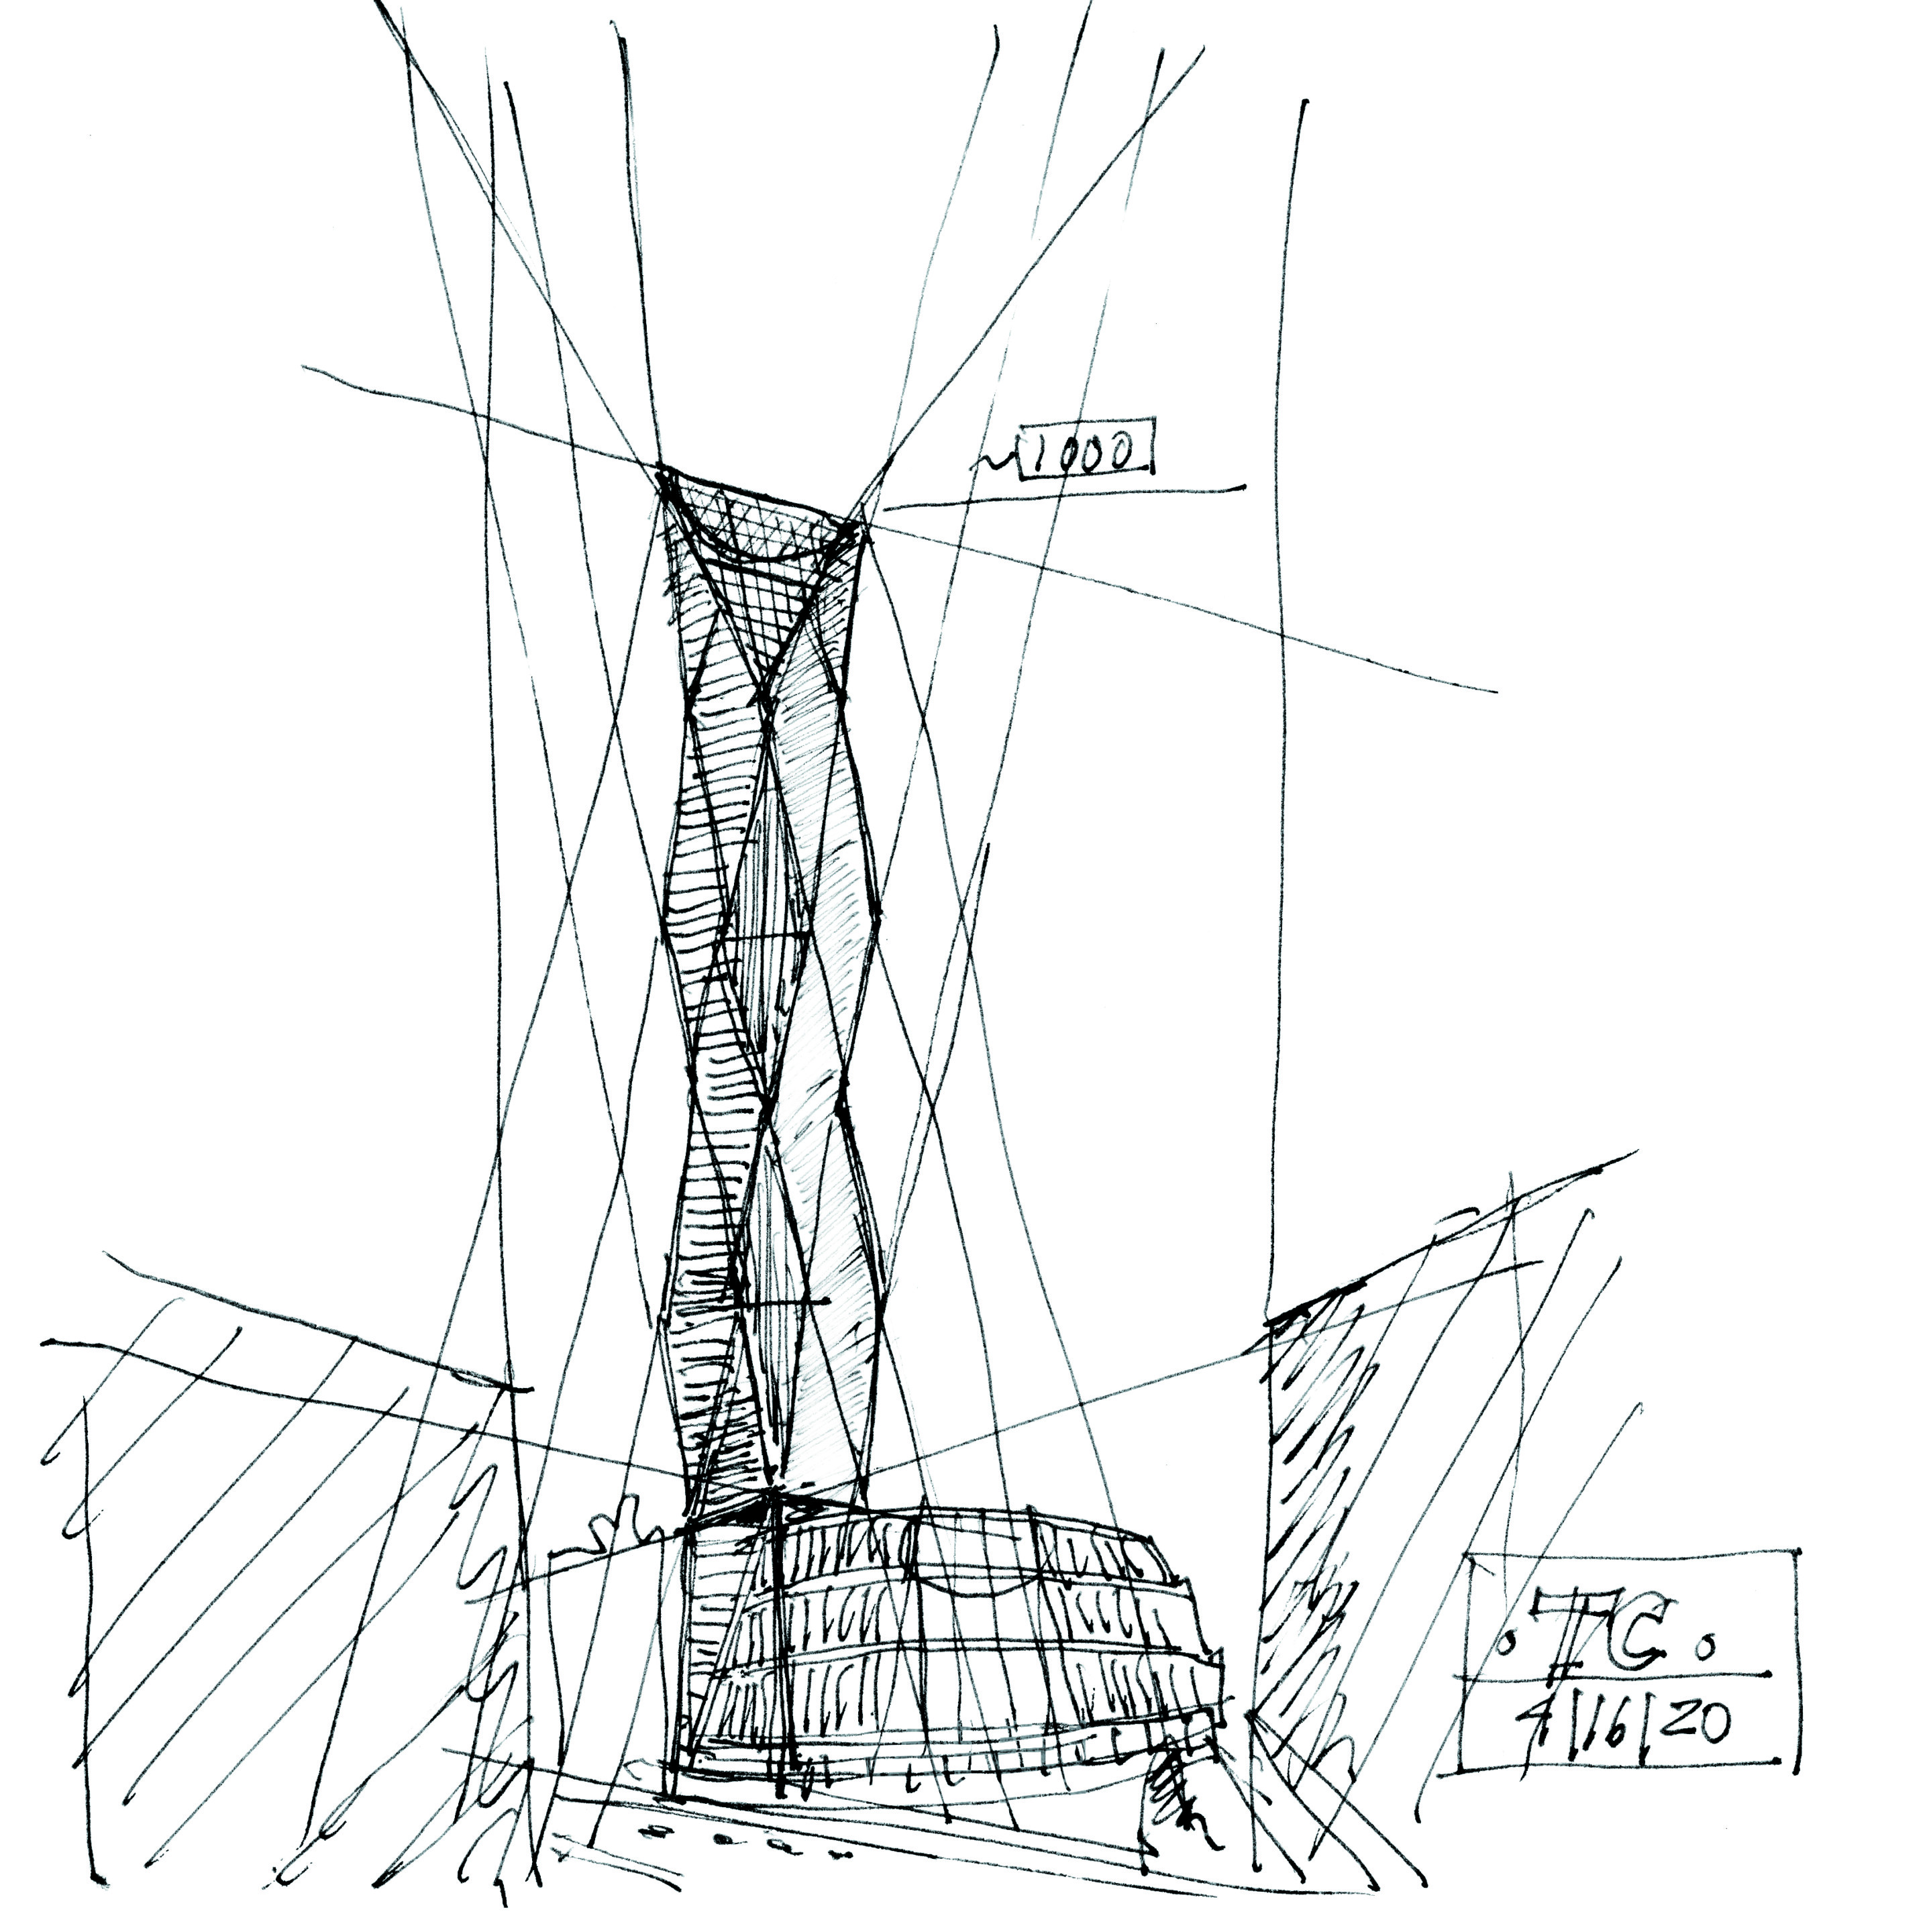 A sketch from helmut jahn of a tower